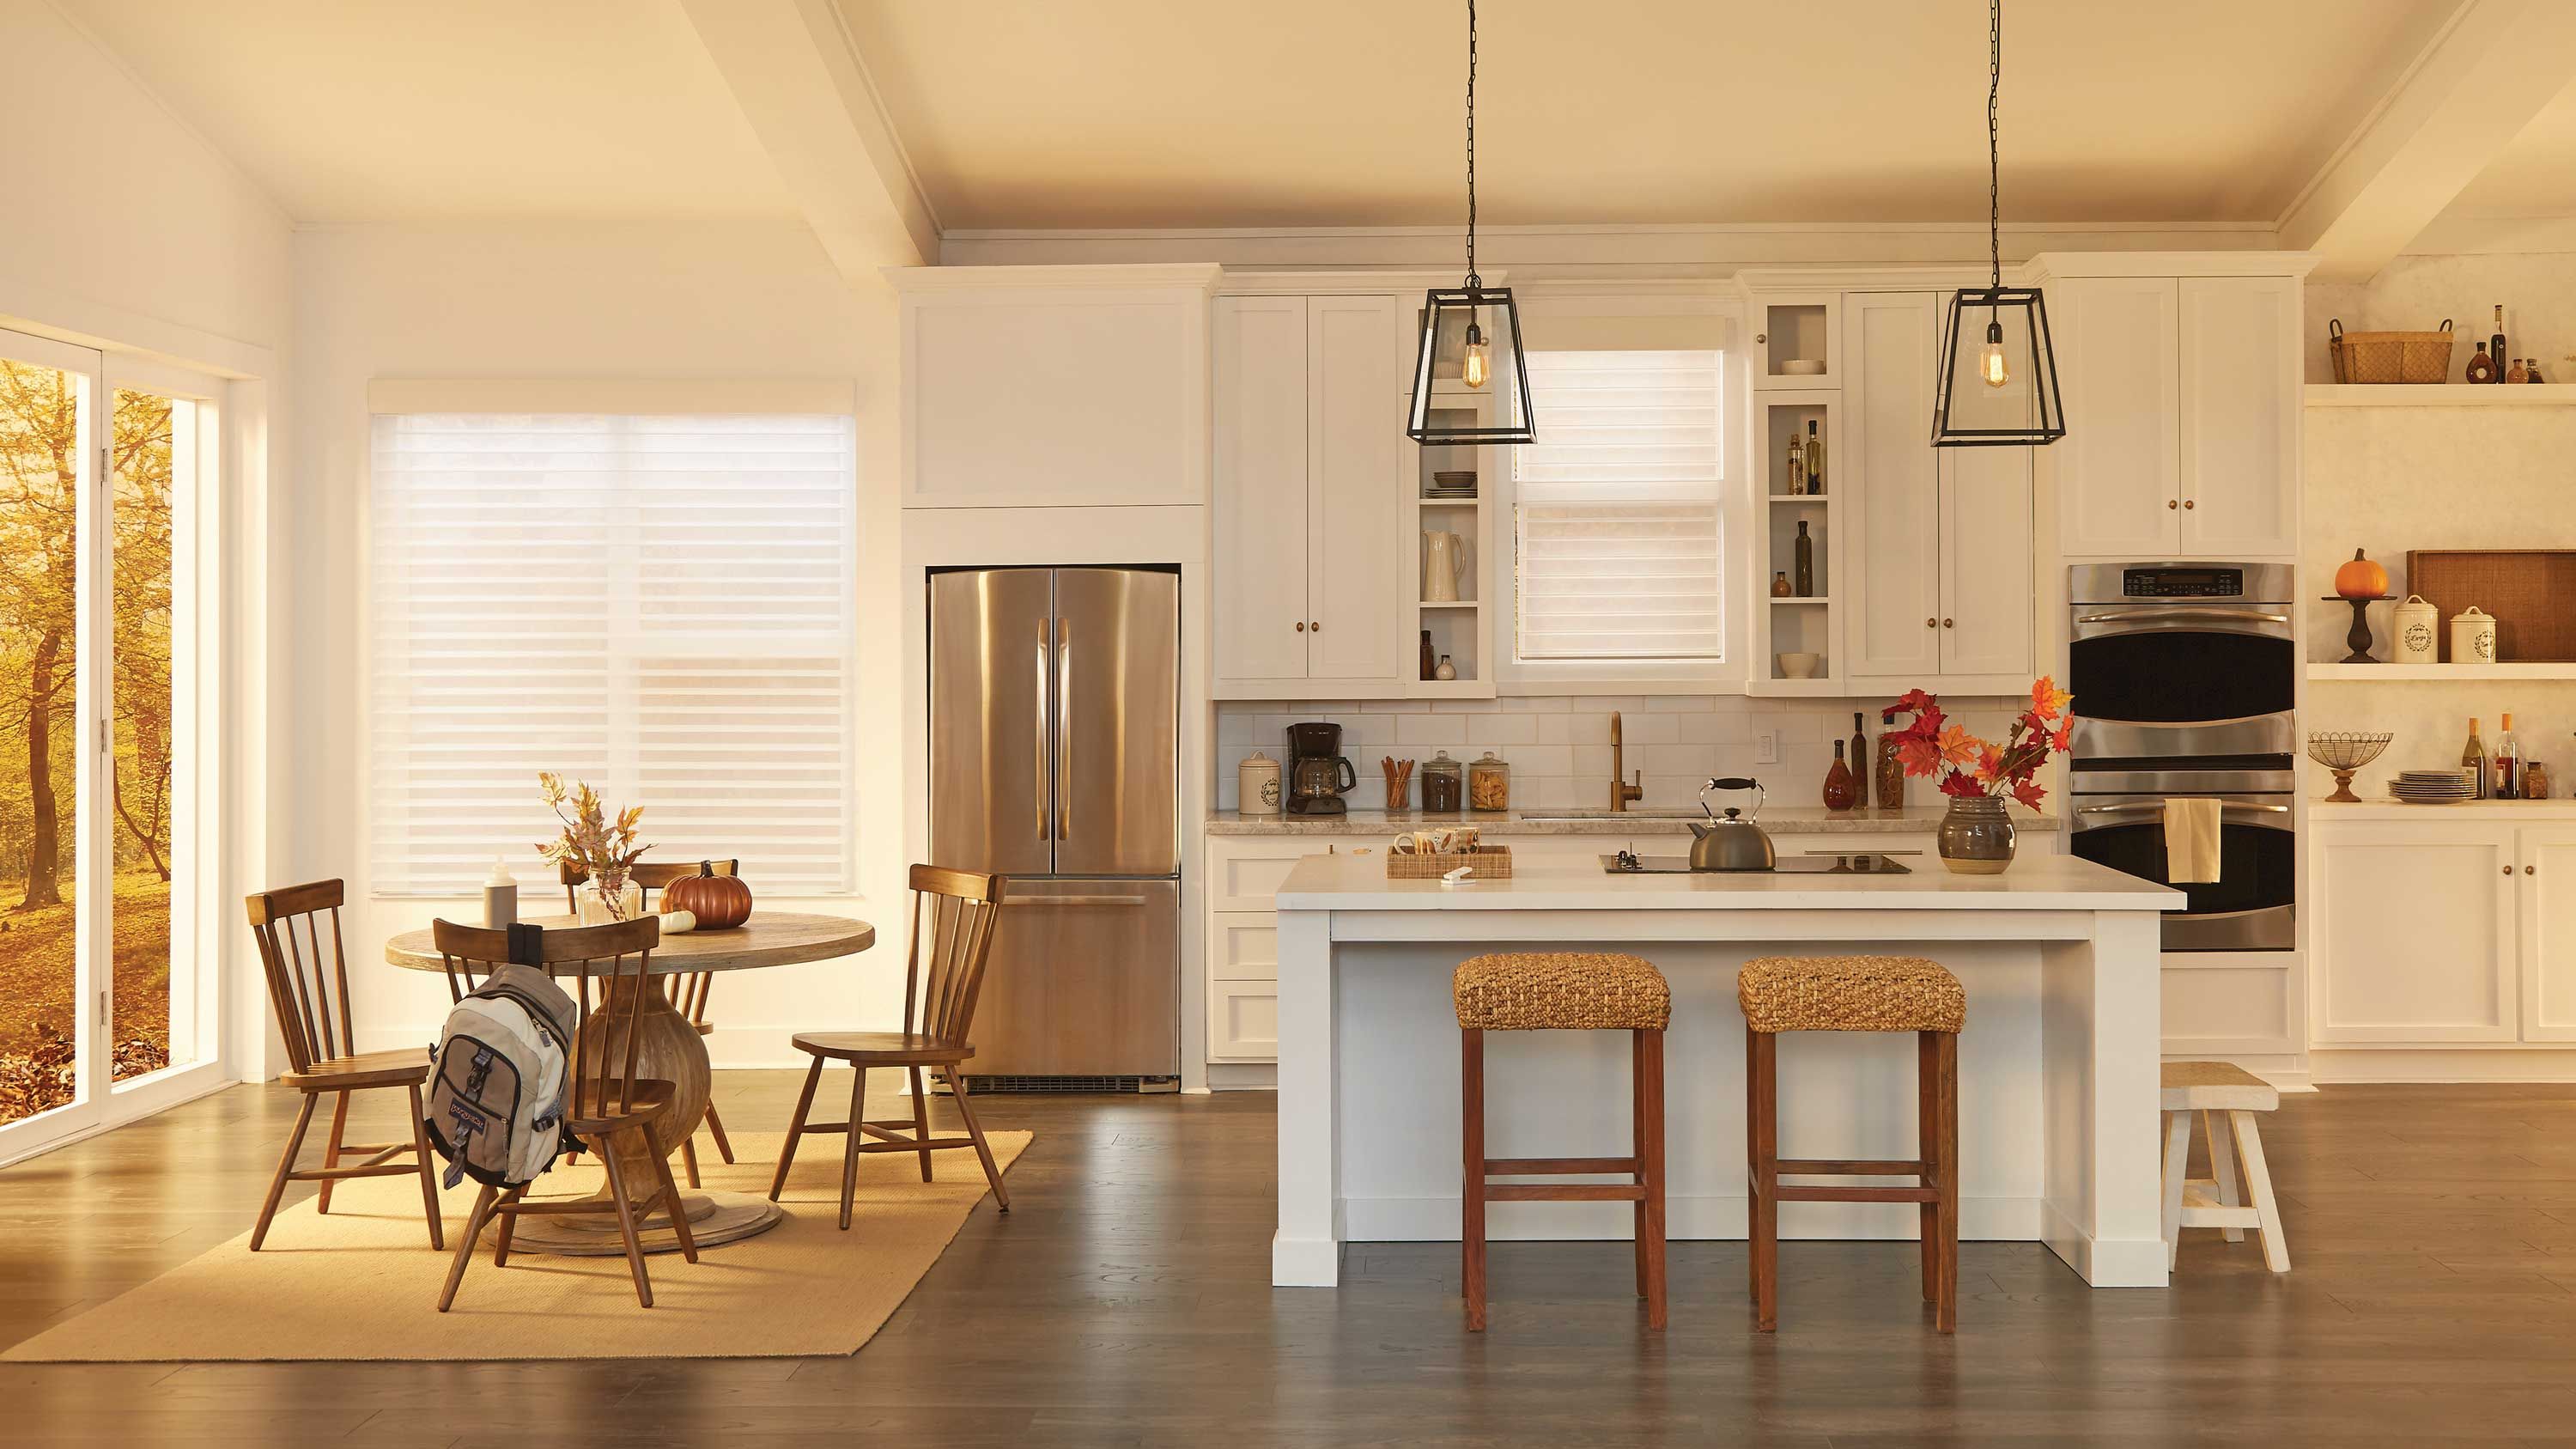 warm toned kitchen with lutron lighting and shading